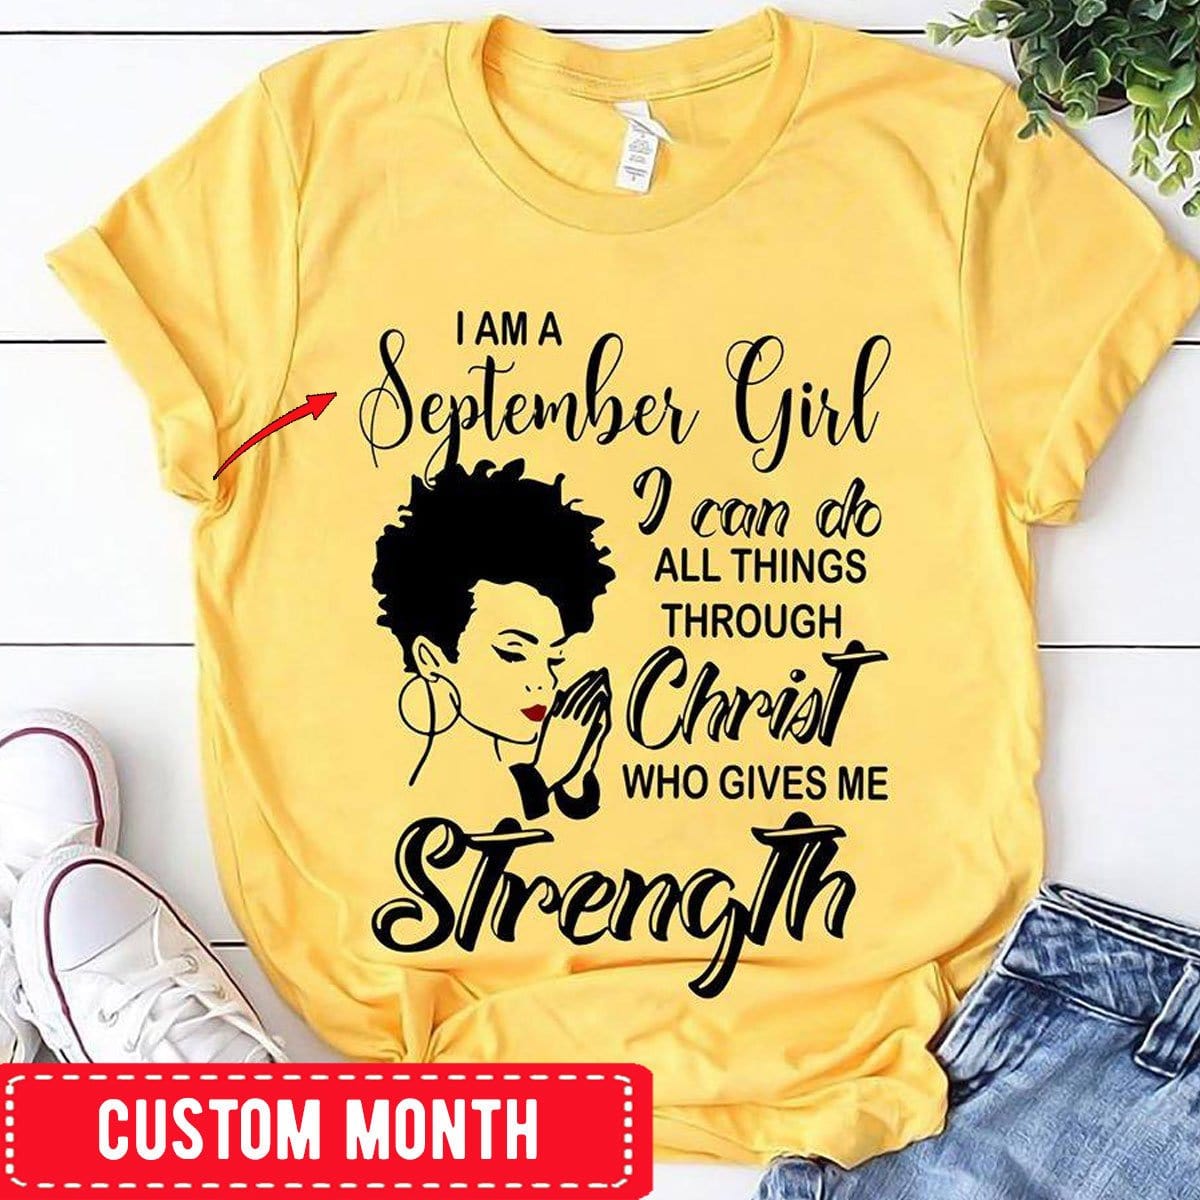 I'm A September Girl I Can Do All Things, Personalized Birthday Shirts